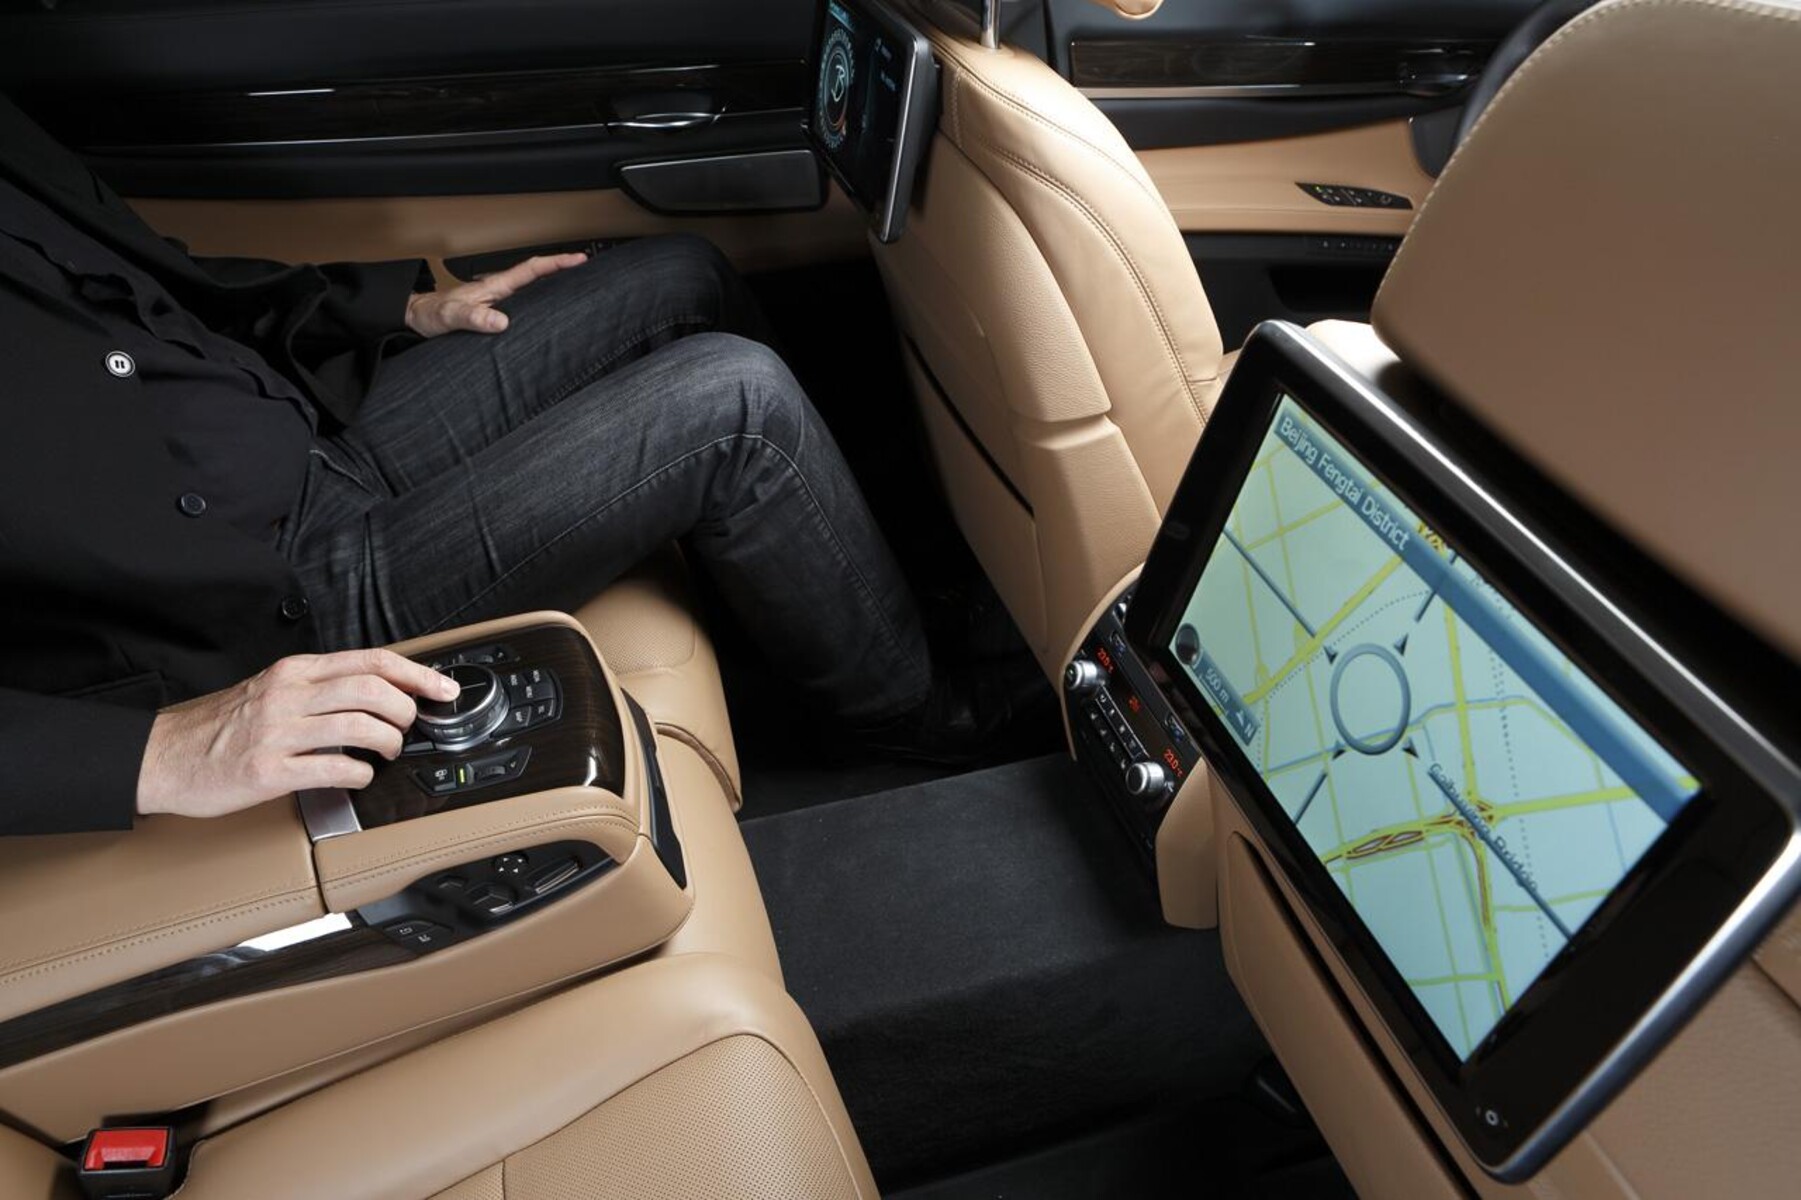 Activating BMW Wi-Fi Hotspot: Step-by-Step Instructions